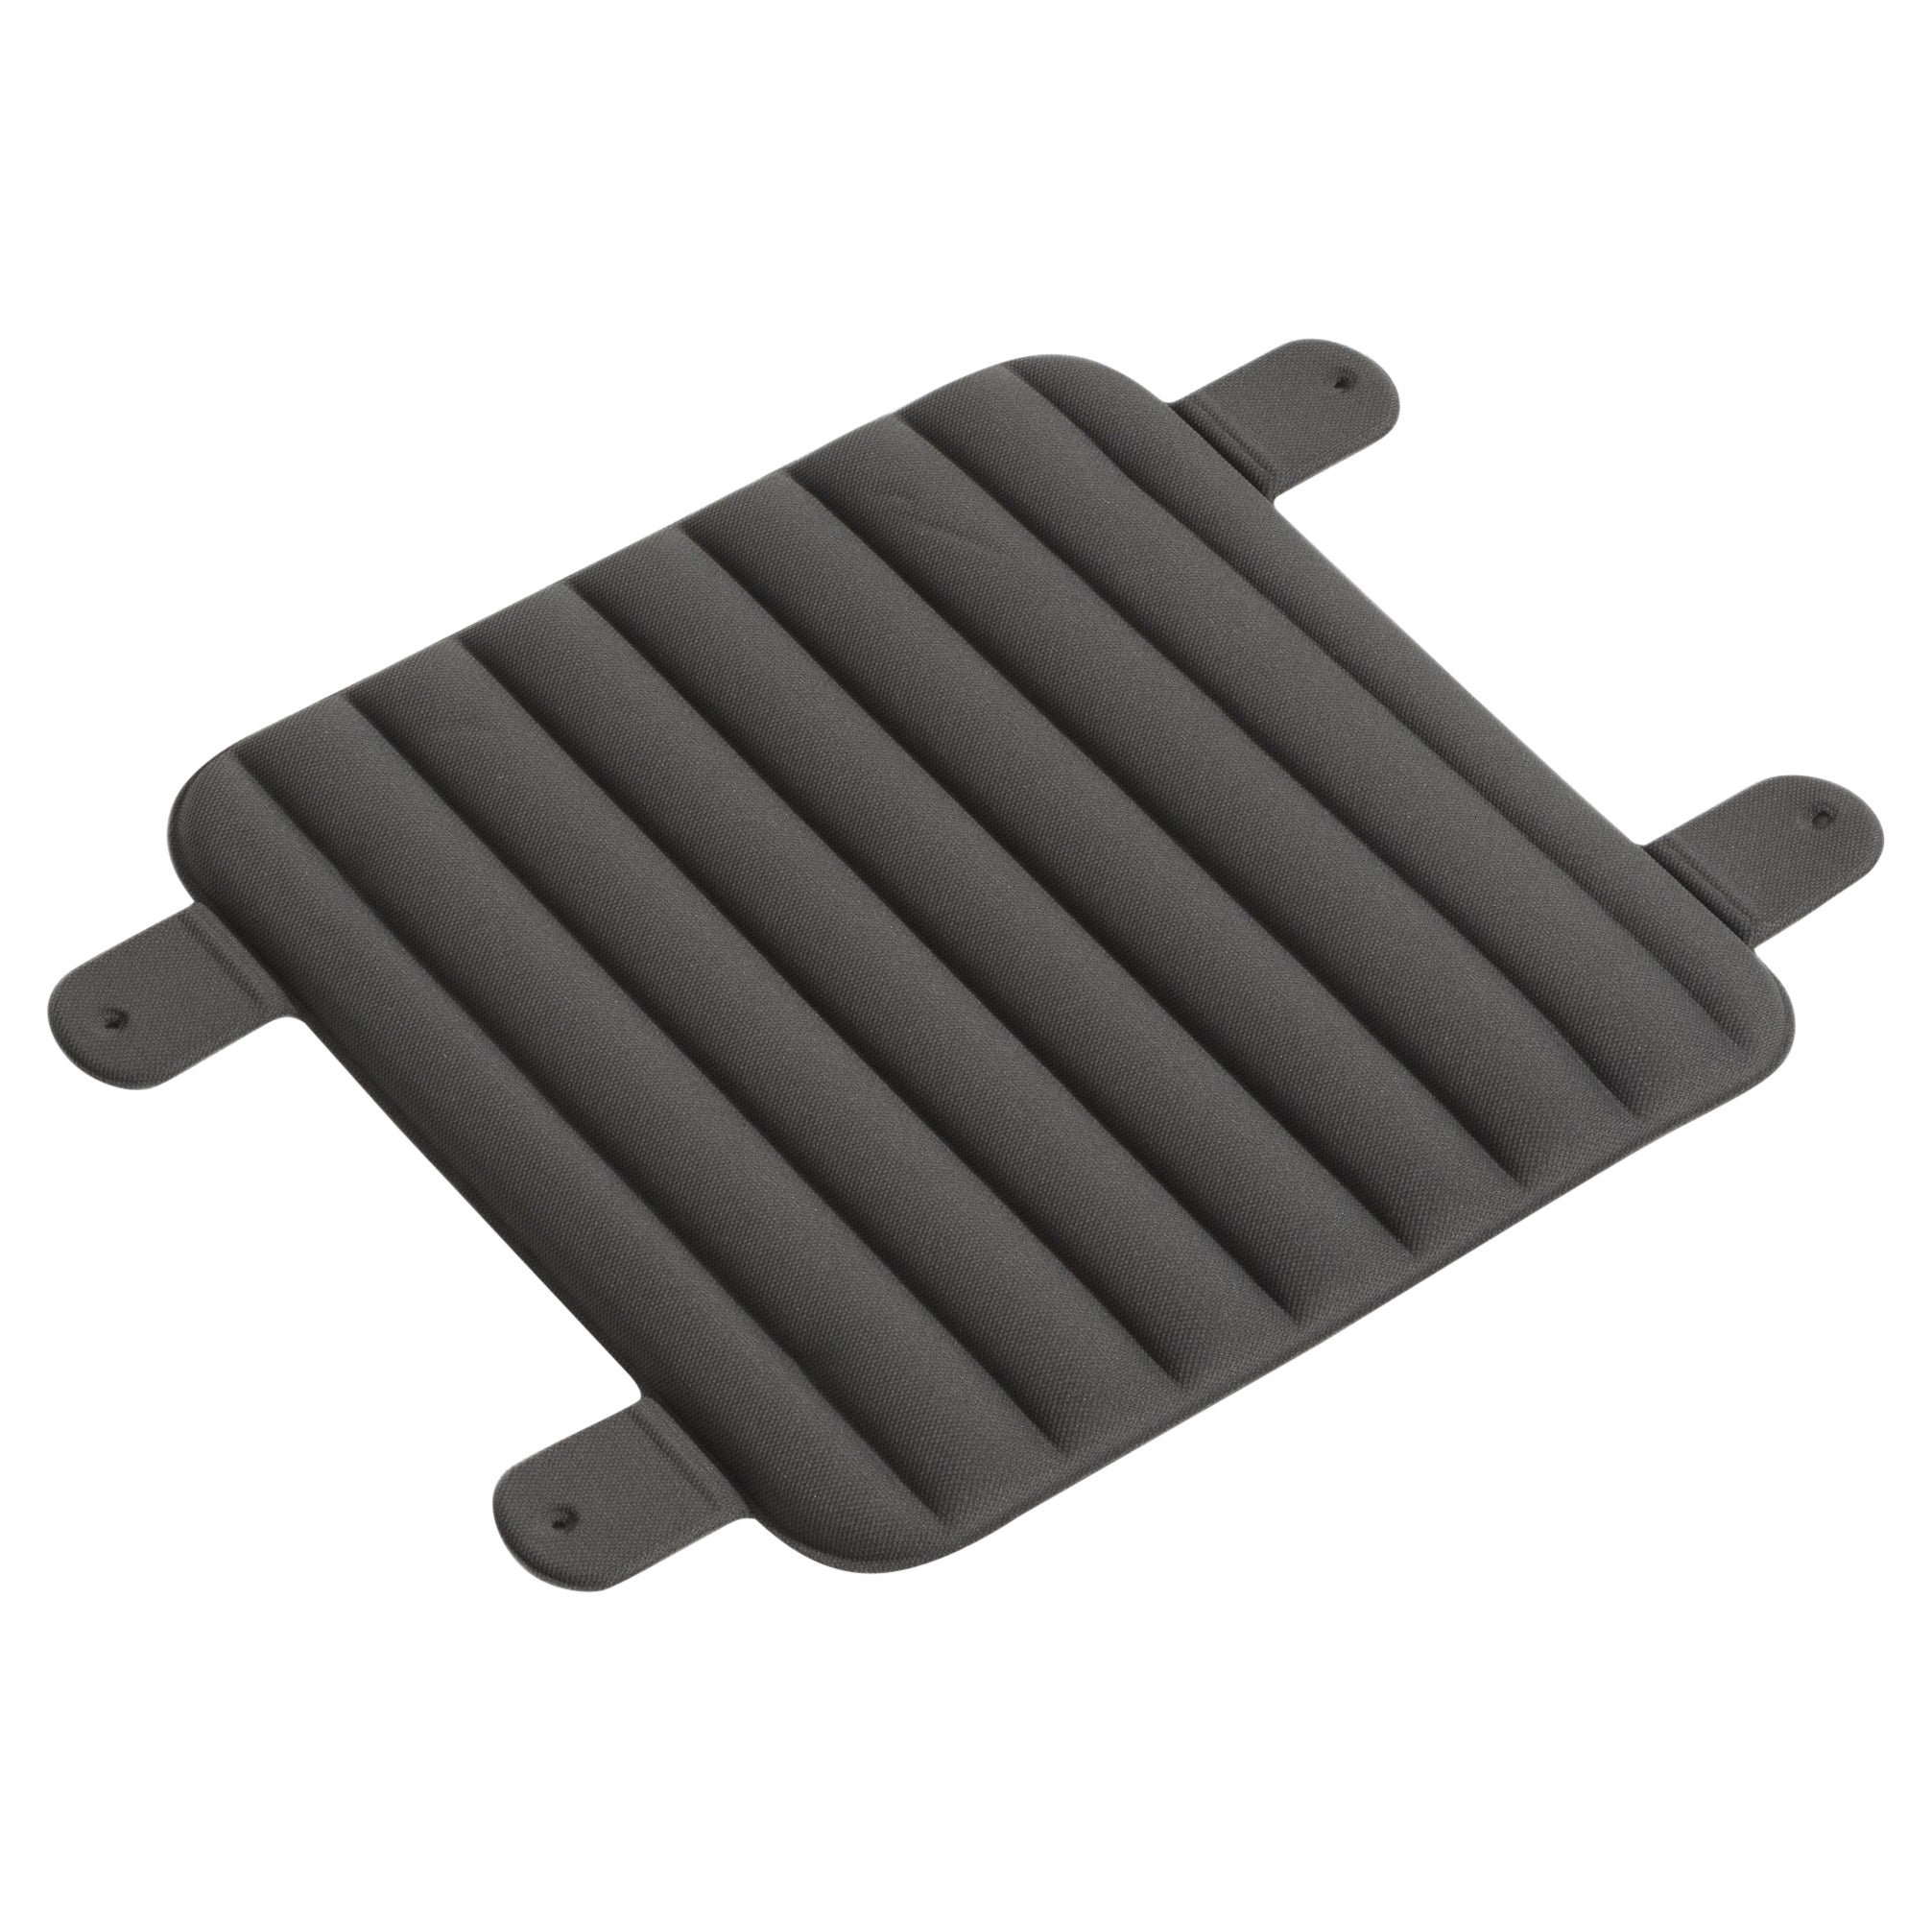 Petite Friture Week-End Samll Seat Cushions in Anthracite, 2019 For Sale